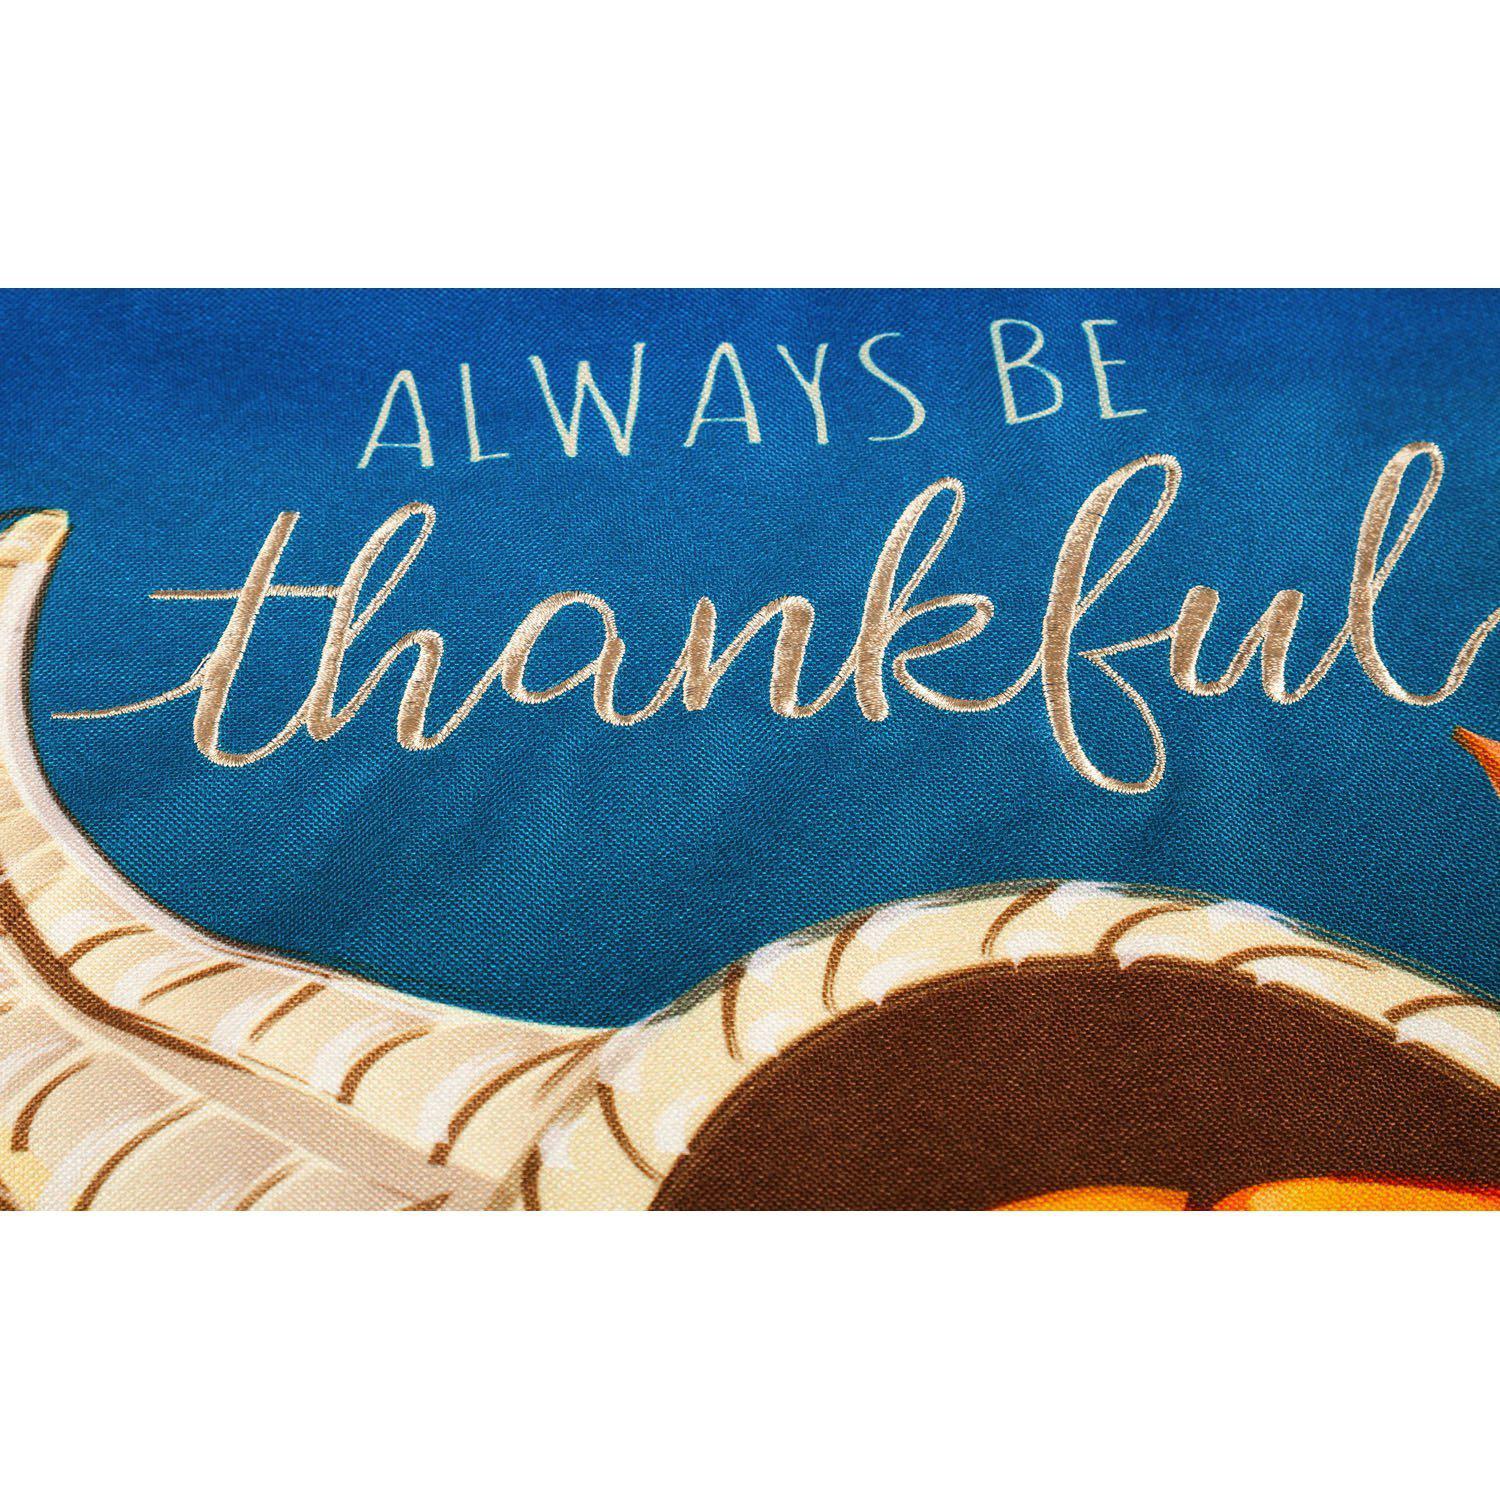 The Cornucopia With Checks garden flag features a cornucopia with fall fruits and vegetables and the words "Always Be Thankful". 